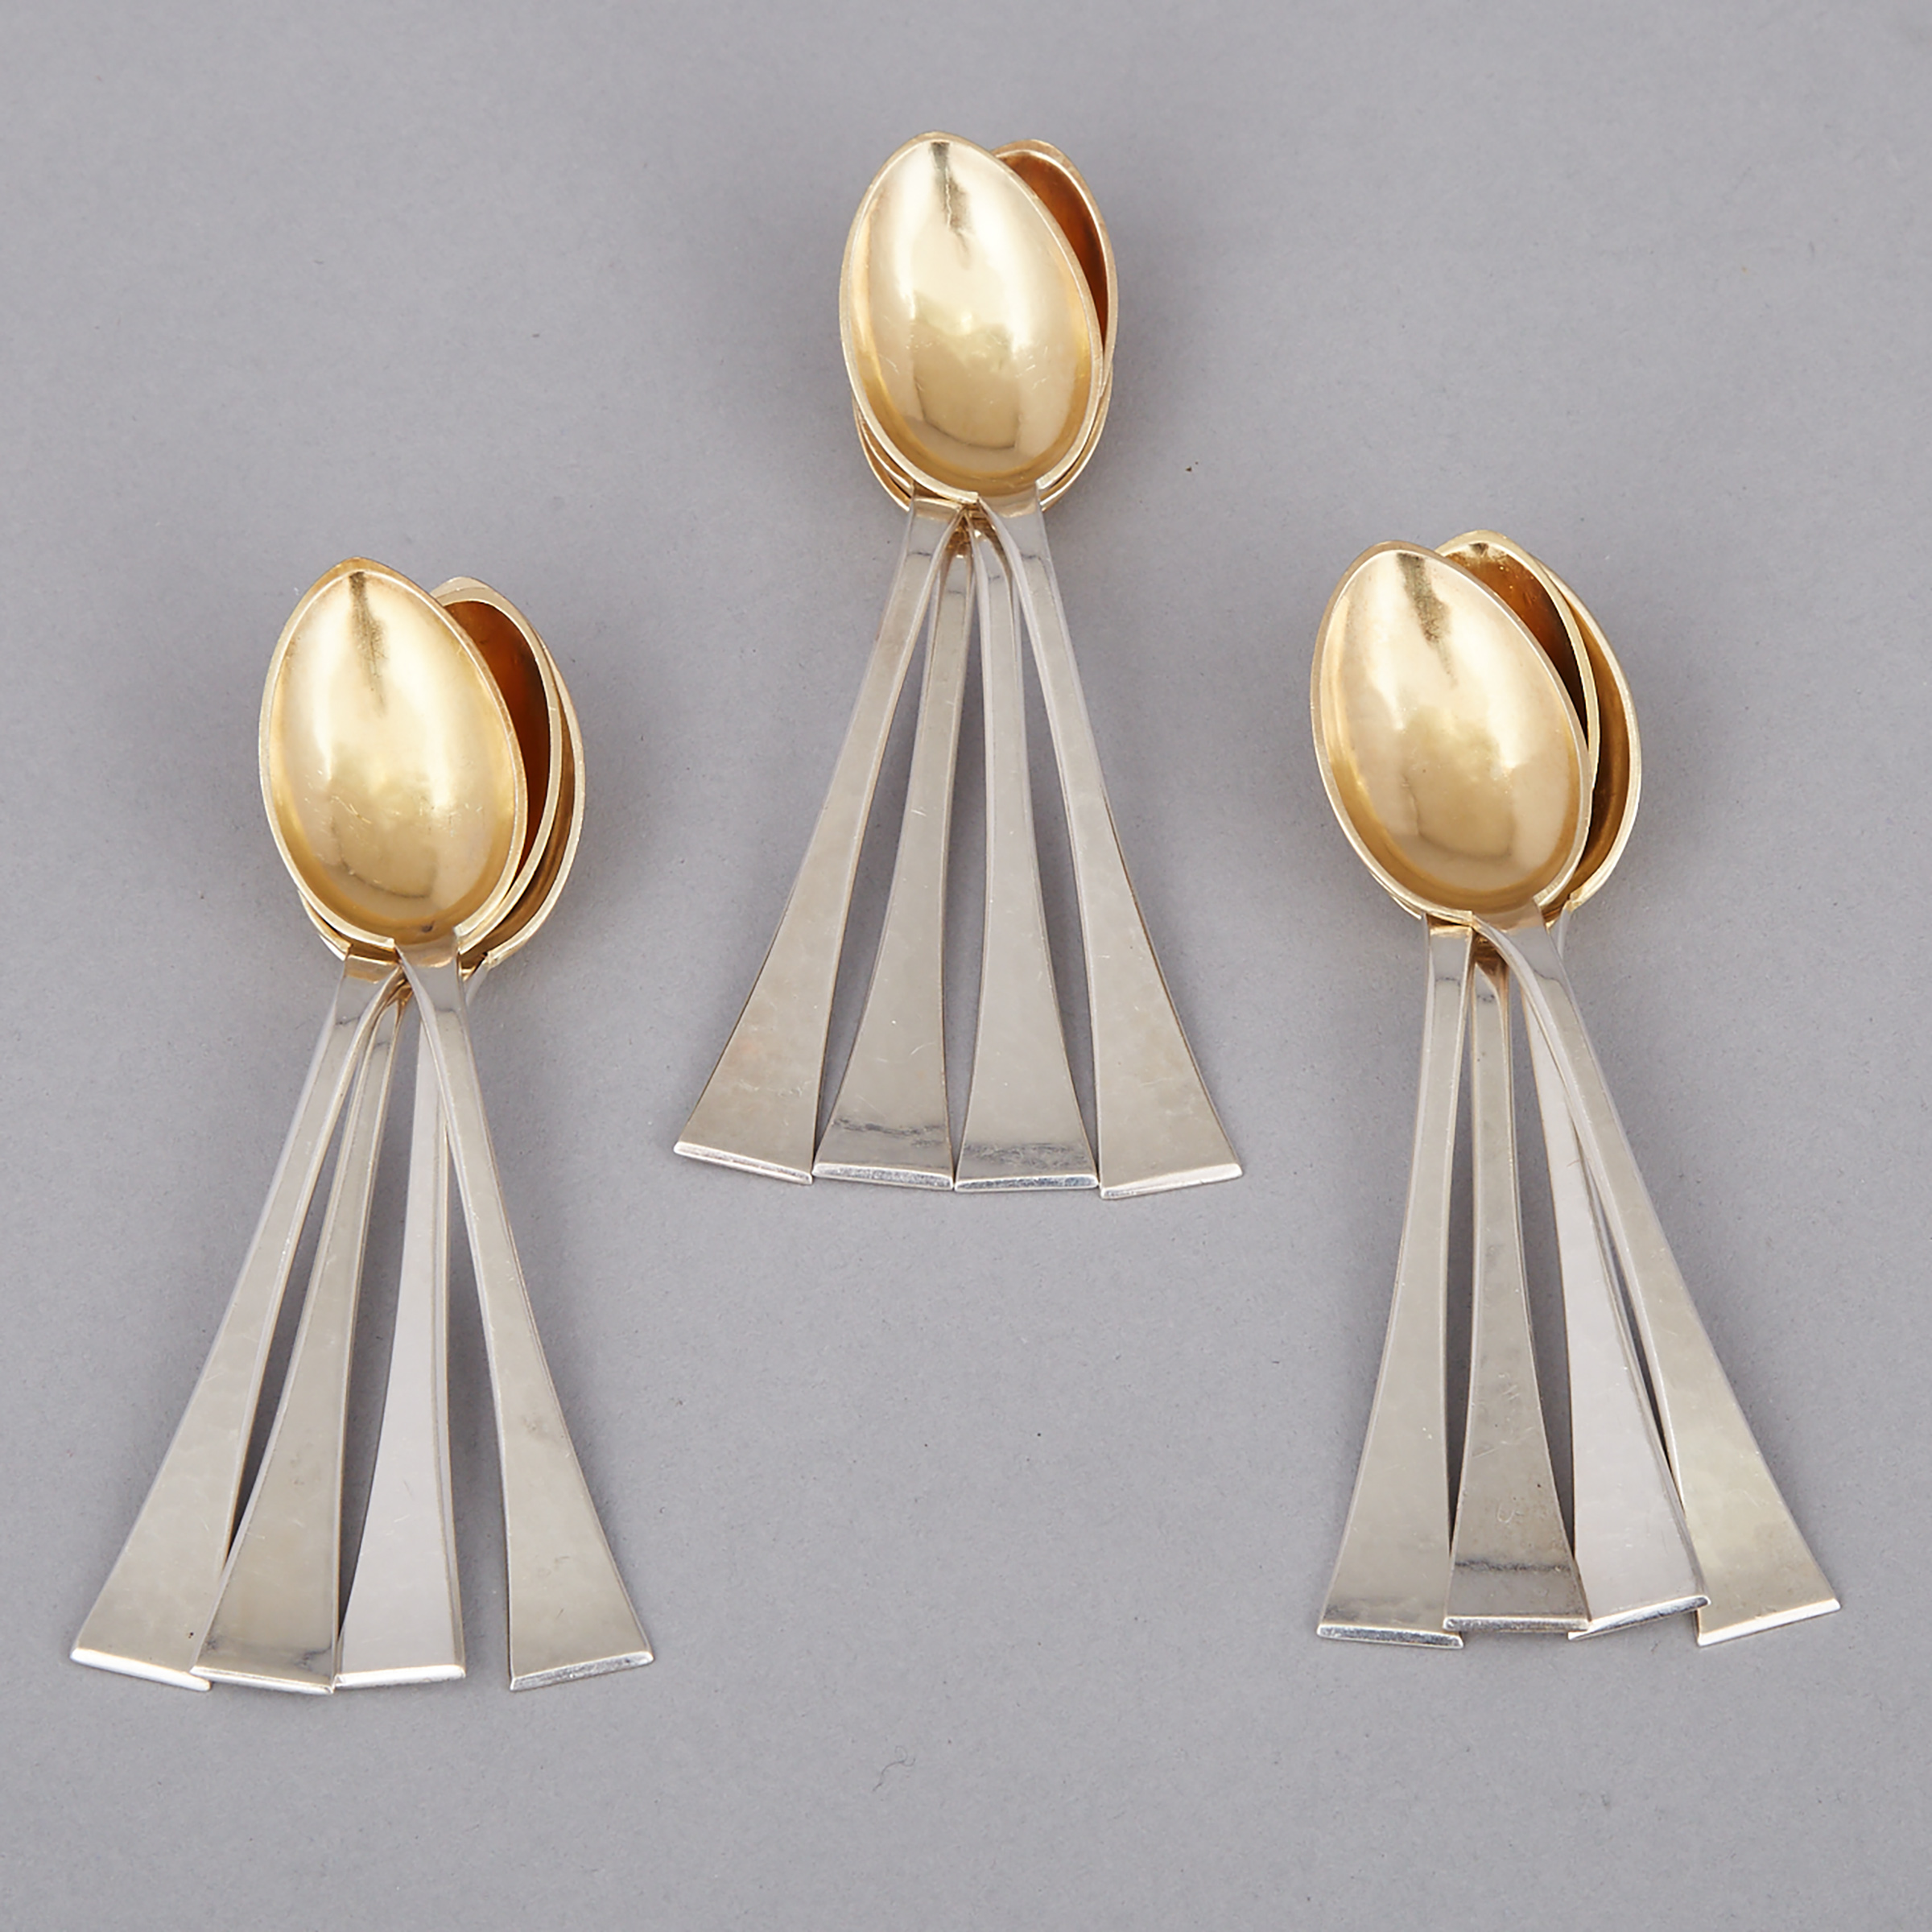 Set of Twelve Canadian Silver Coffee Spoons, Carl Poul Petersen, Montreal, Que., mid-20th century